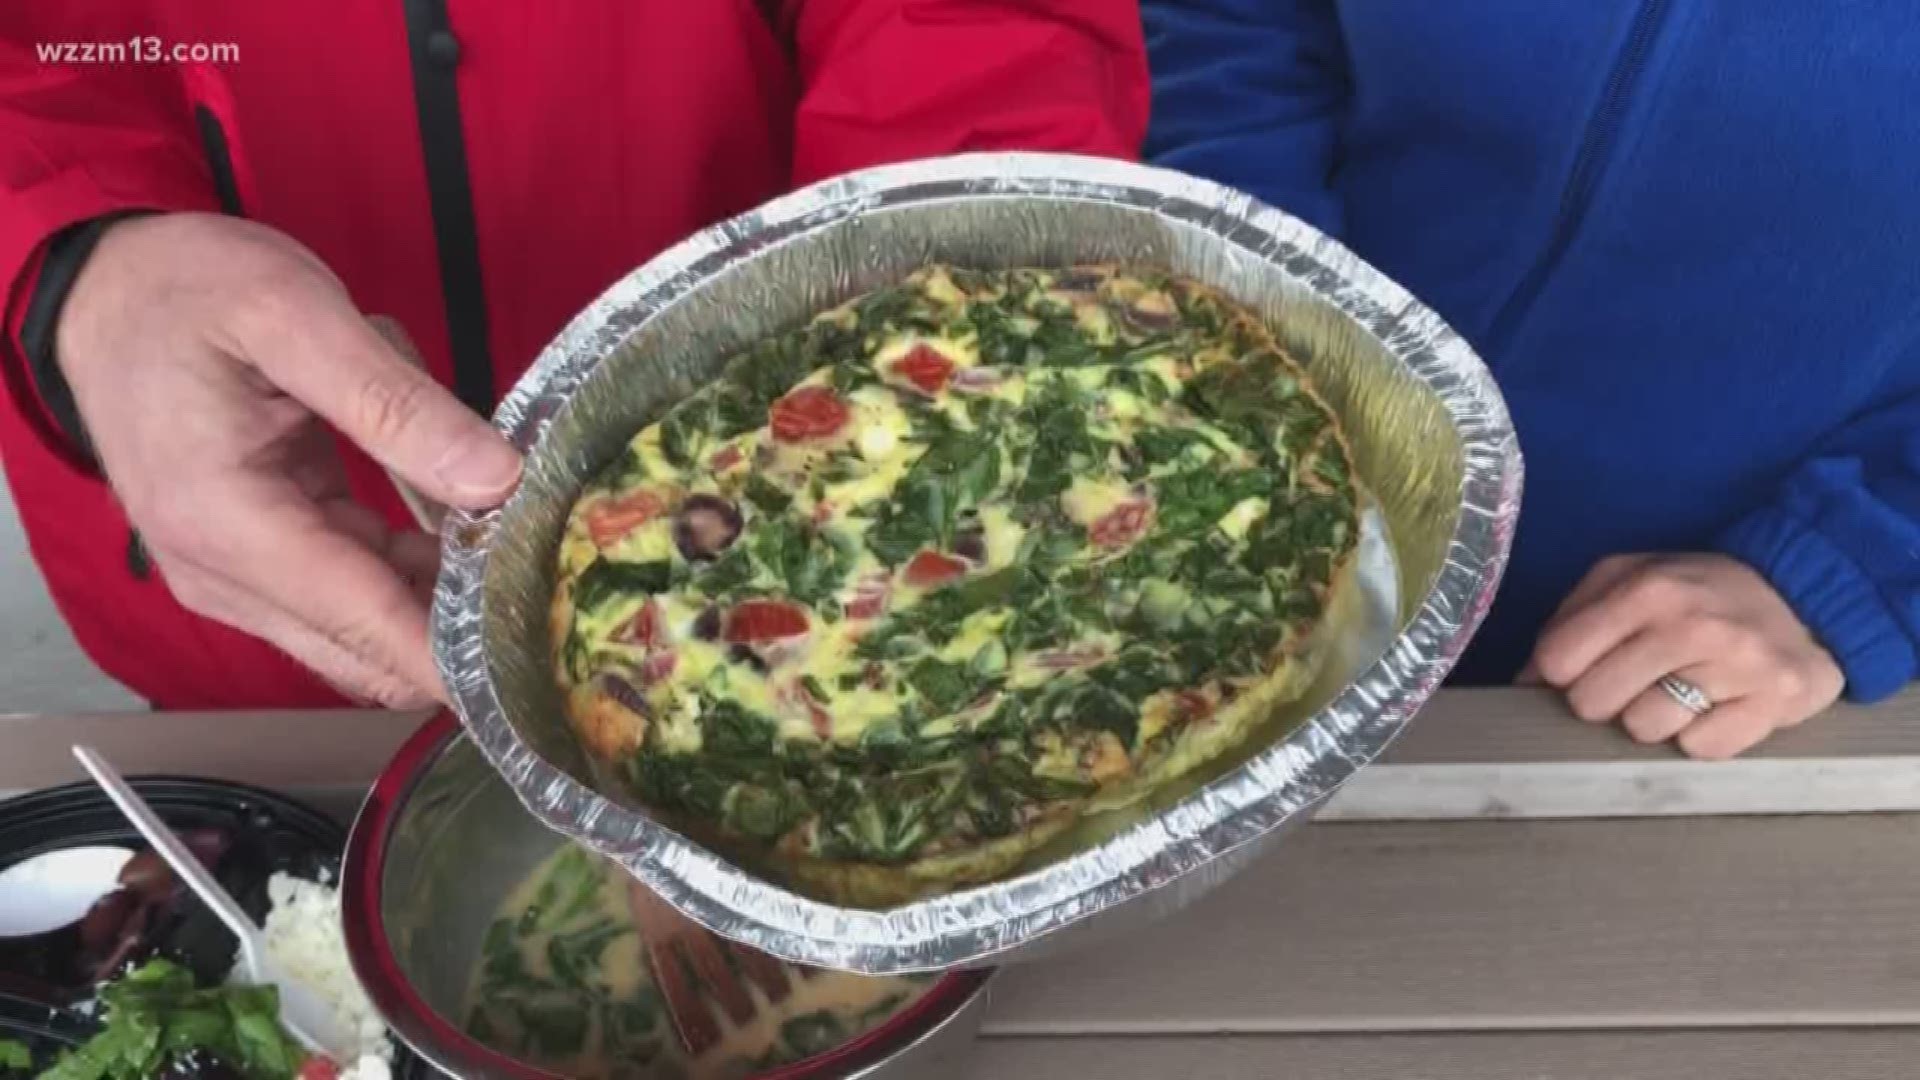 May is International Mediterranean Diet Month. Dietitian Grace Derocha has a great healthy brunch idea made with ingredients found at the Muskegon Farmers Market.